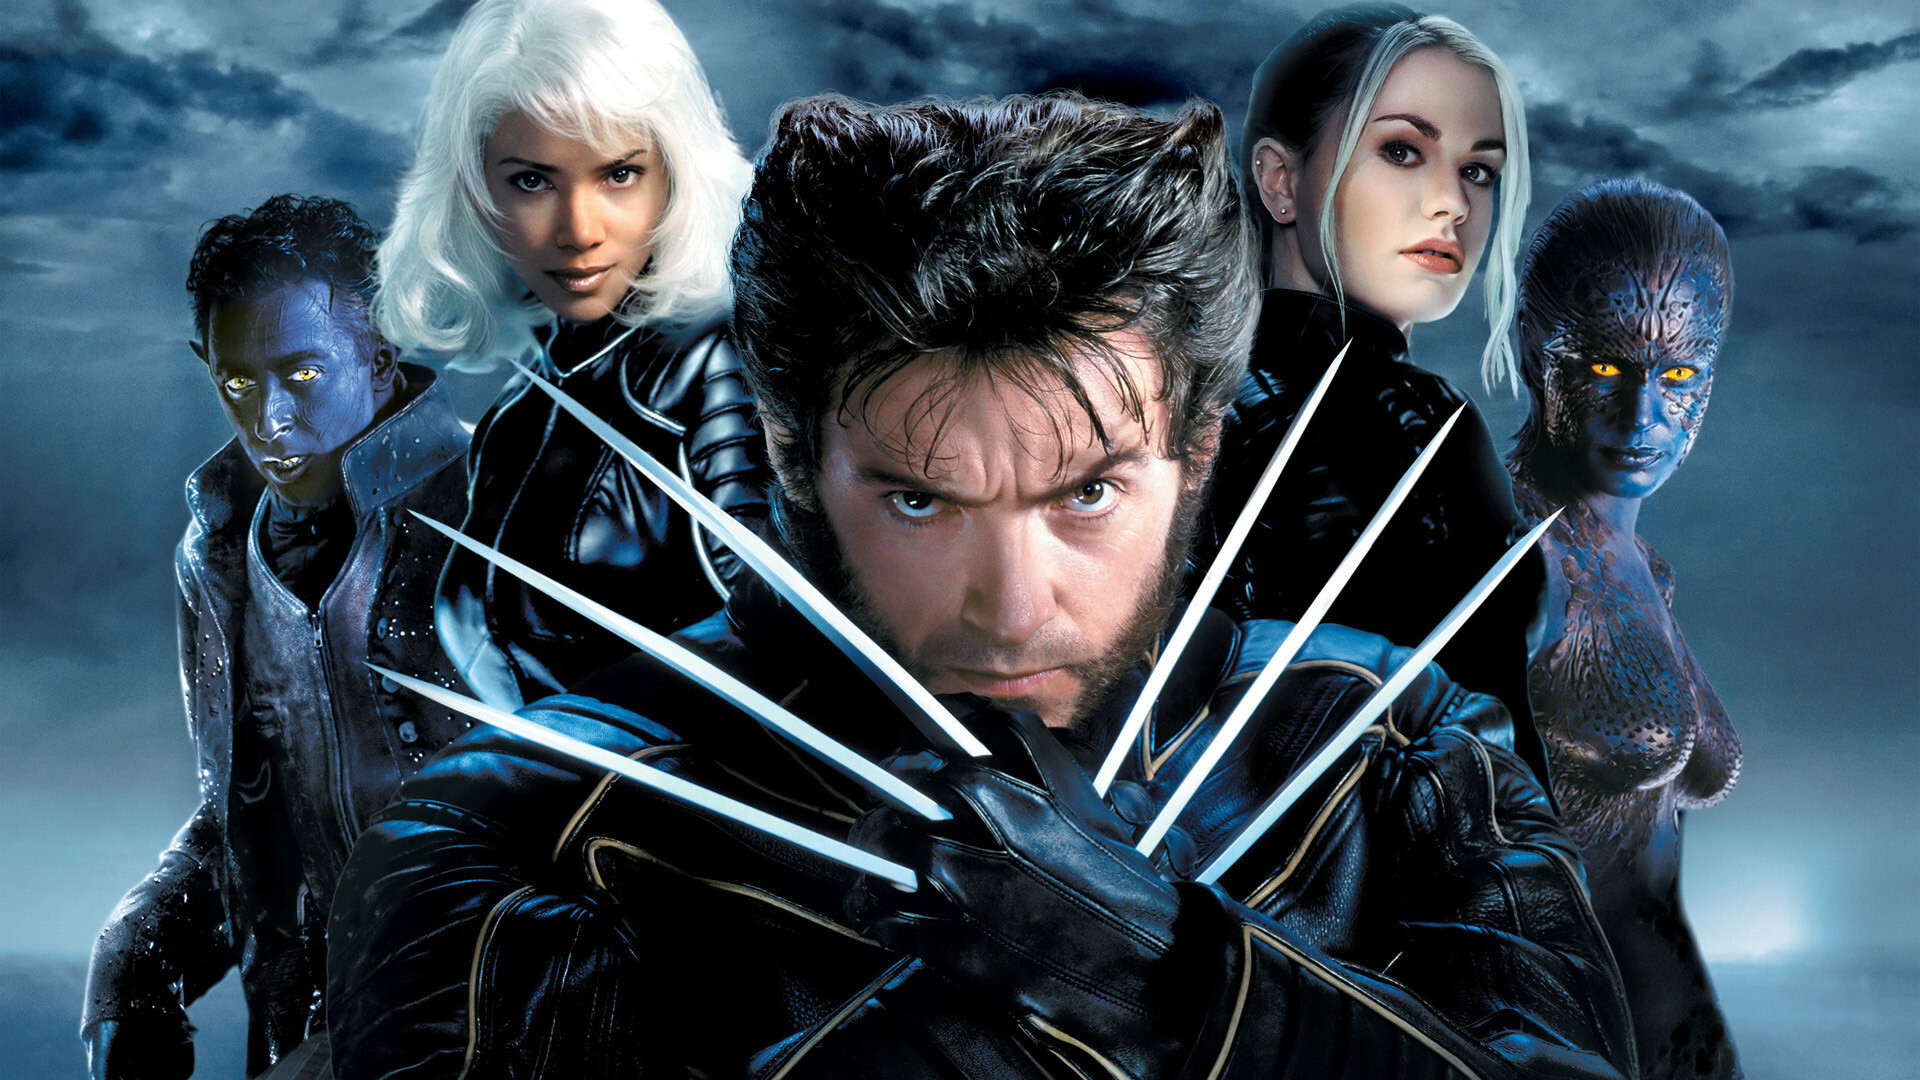 X-Men: X2, Released in the United States on May 2, 2003 by 20th Century Fox. 1920x1080 Full HD Wallpaper.